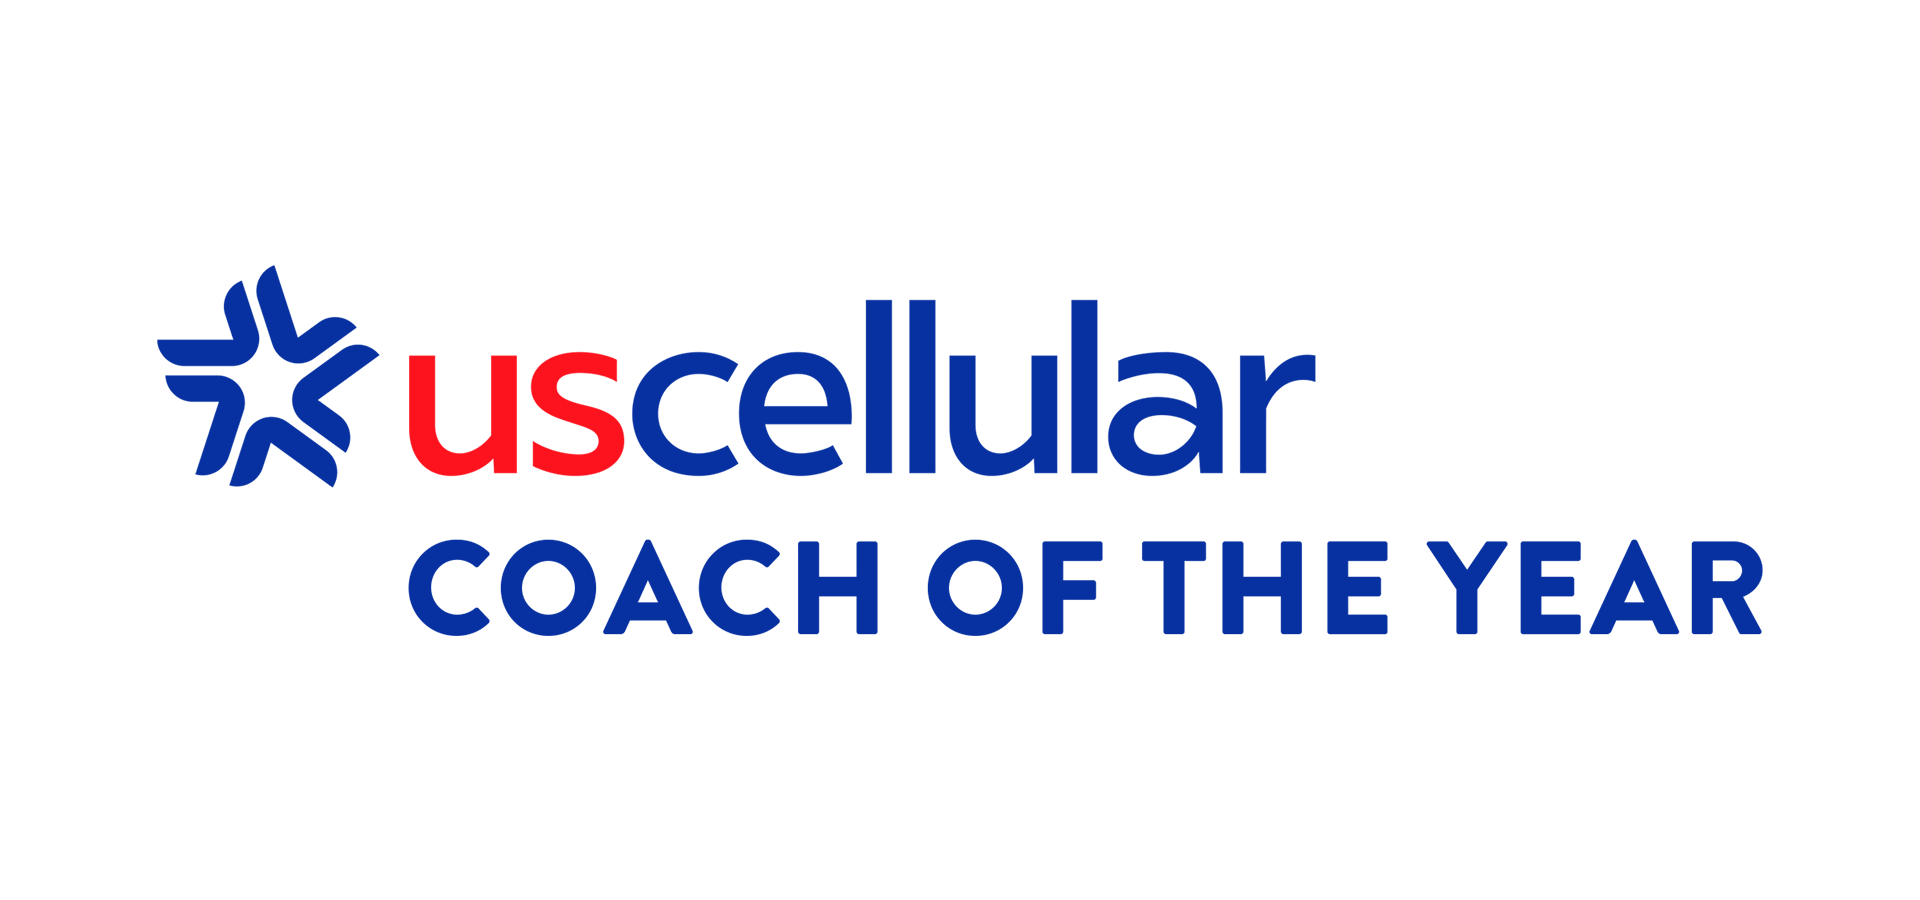 USCellular Coach of the Year